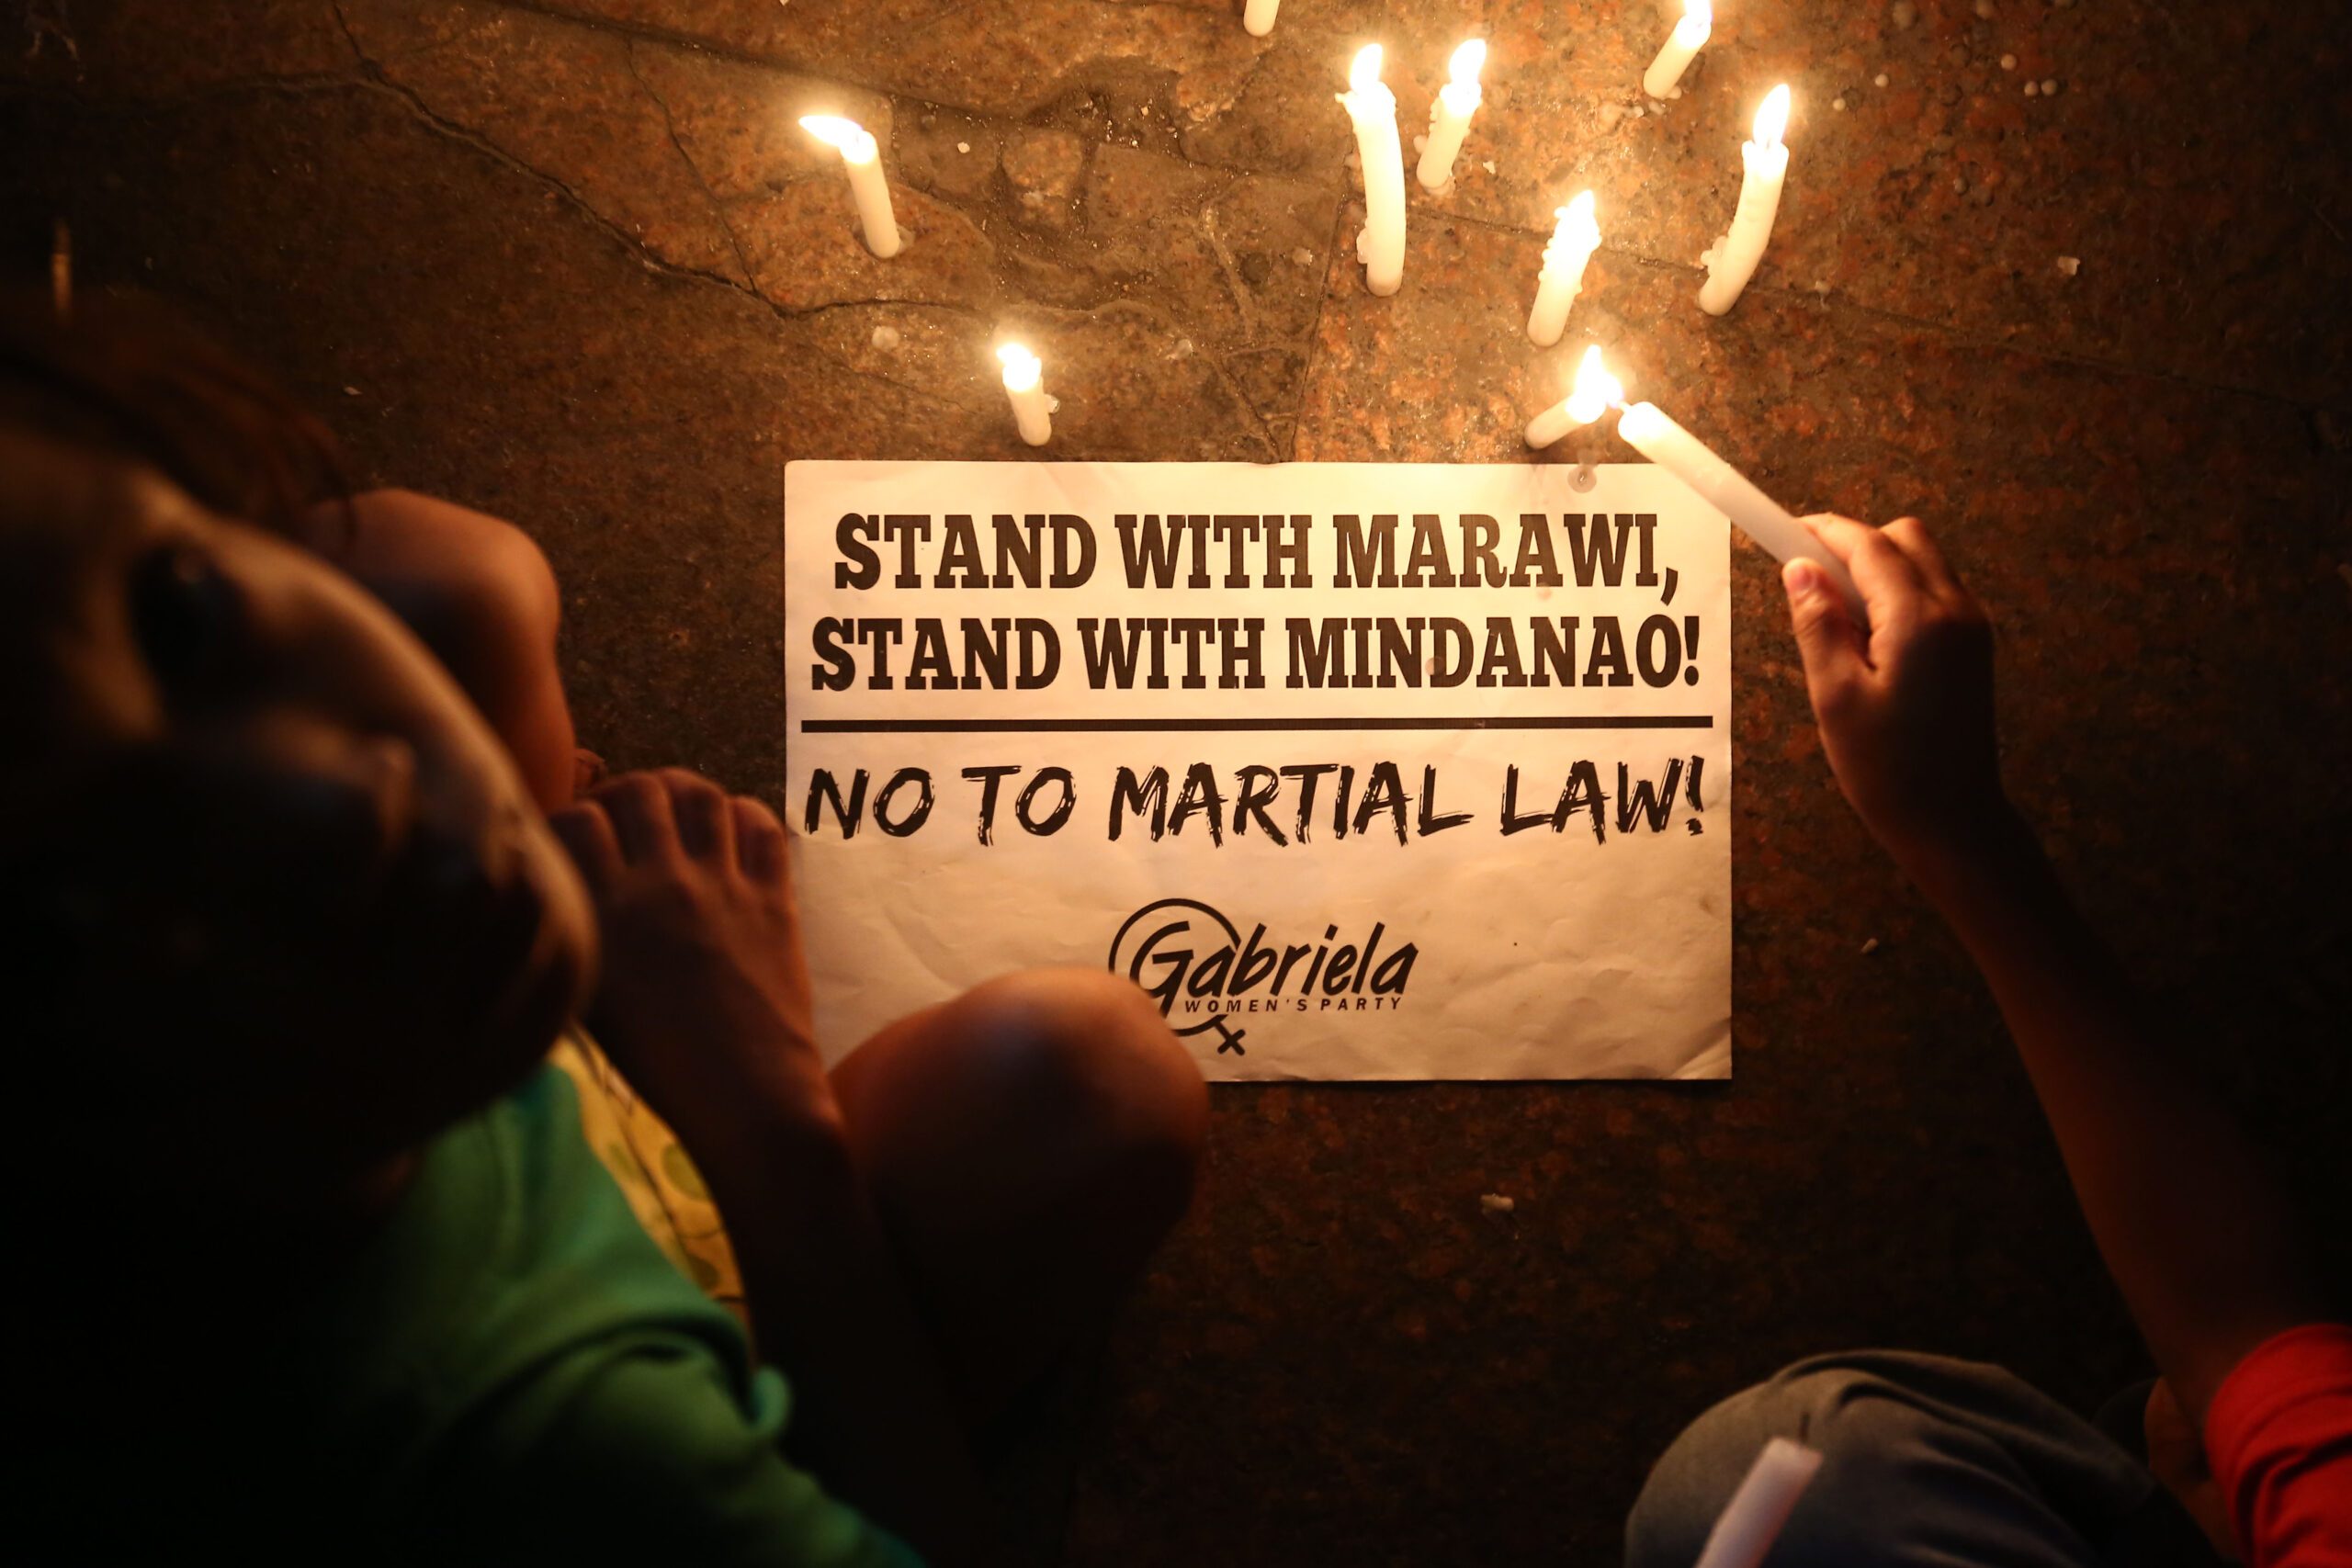 IN PHOTOS: Advocates light candles rejecting martial law